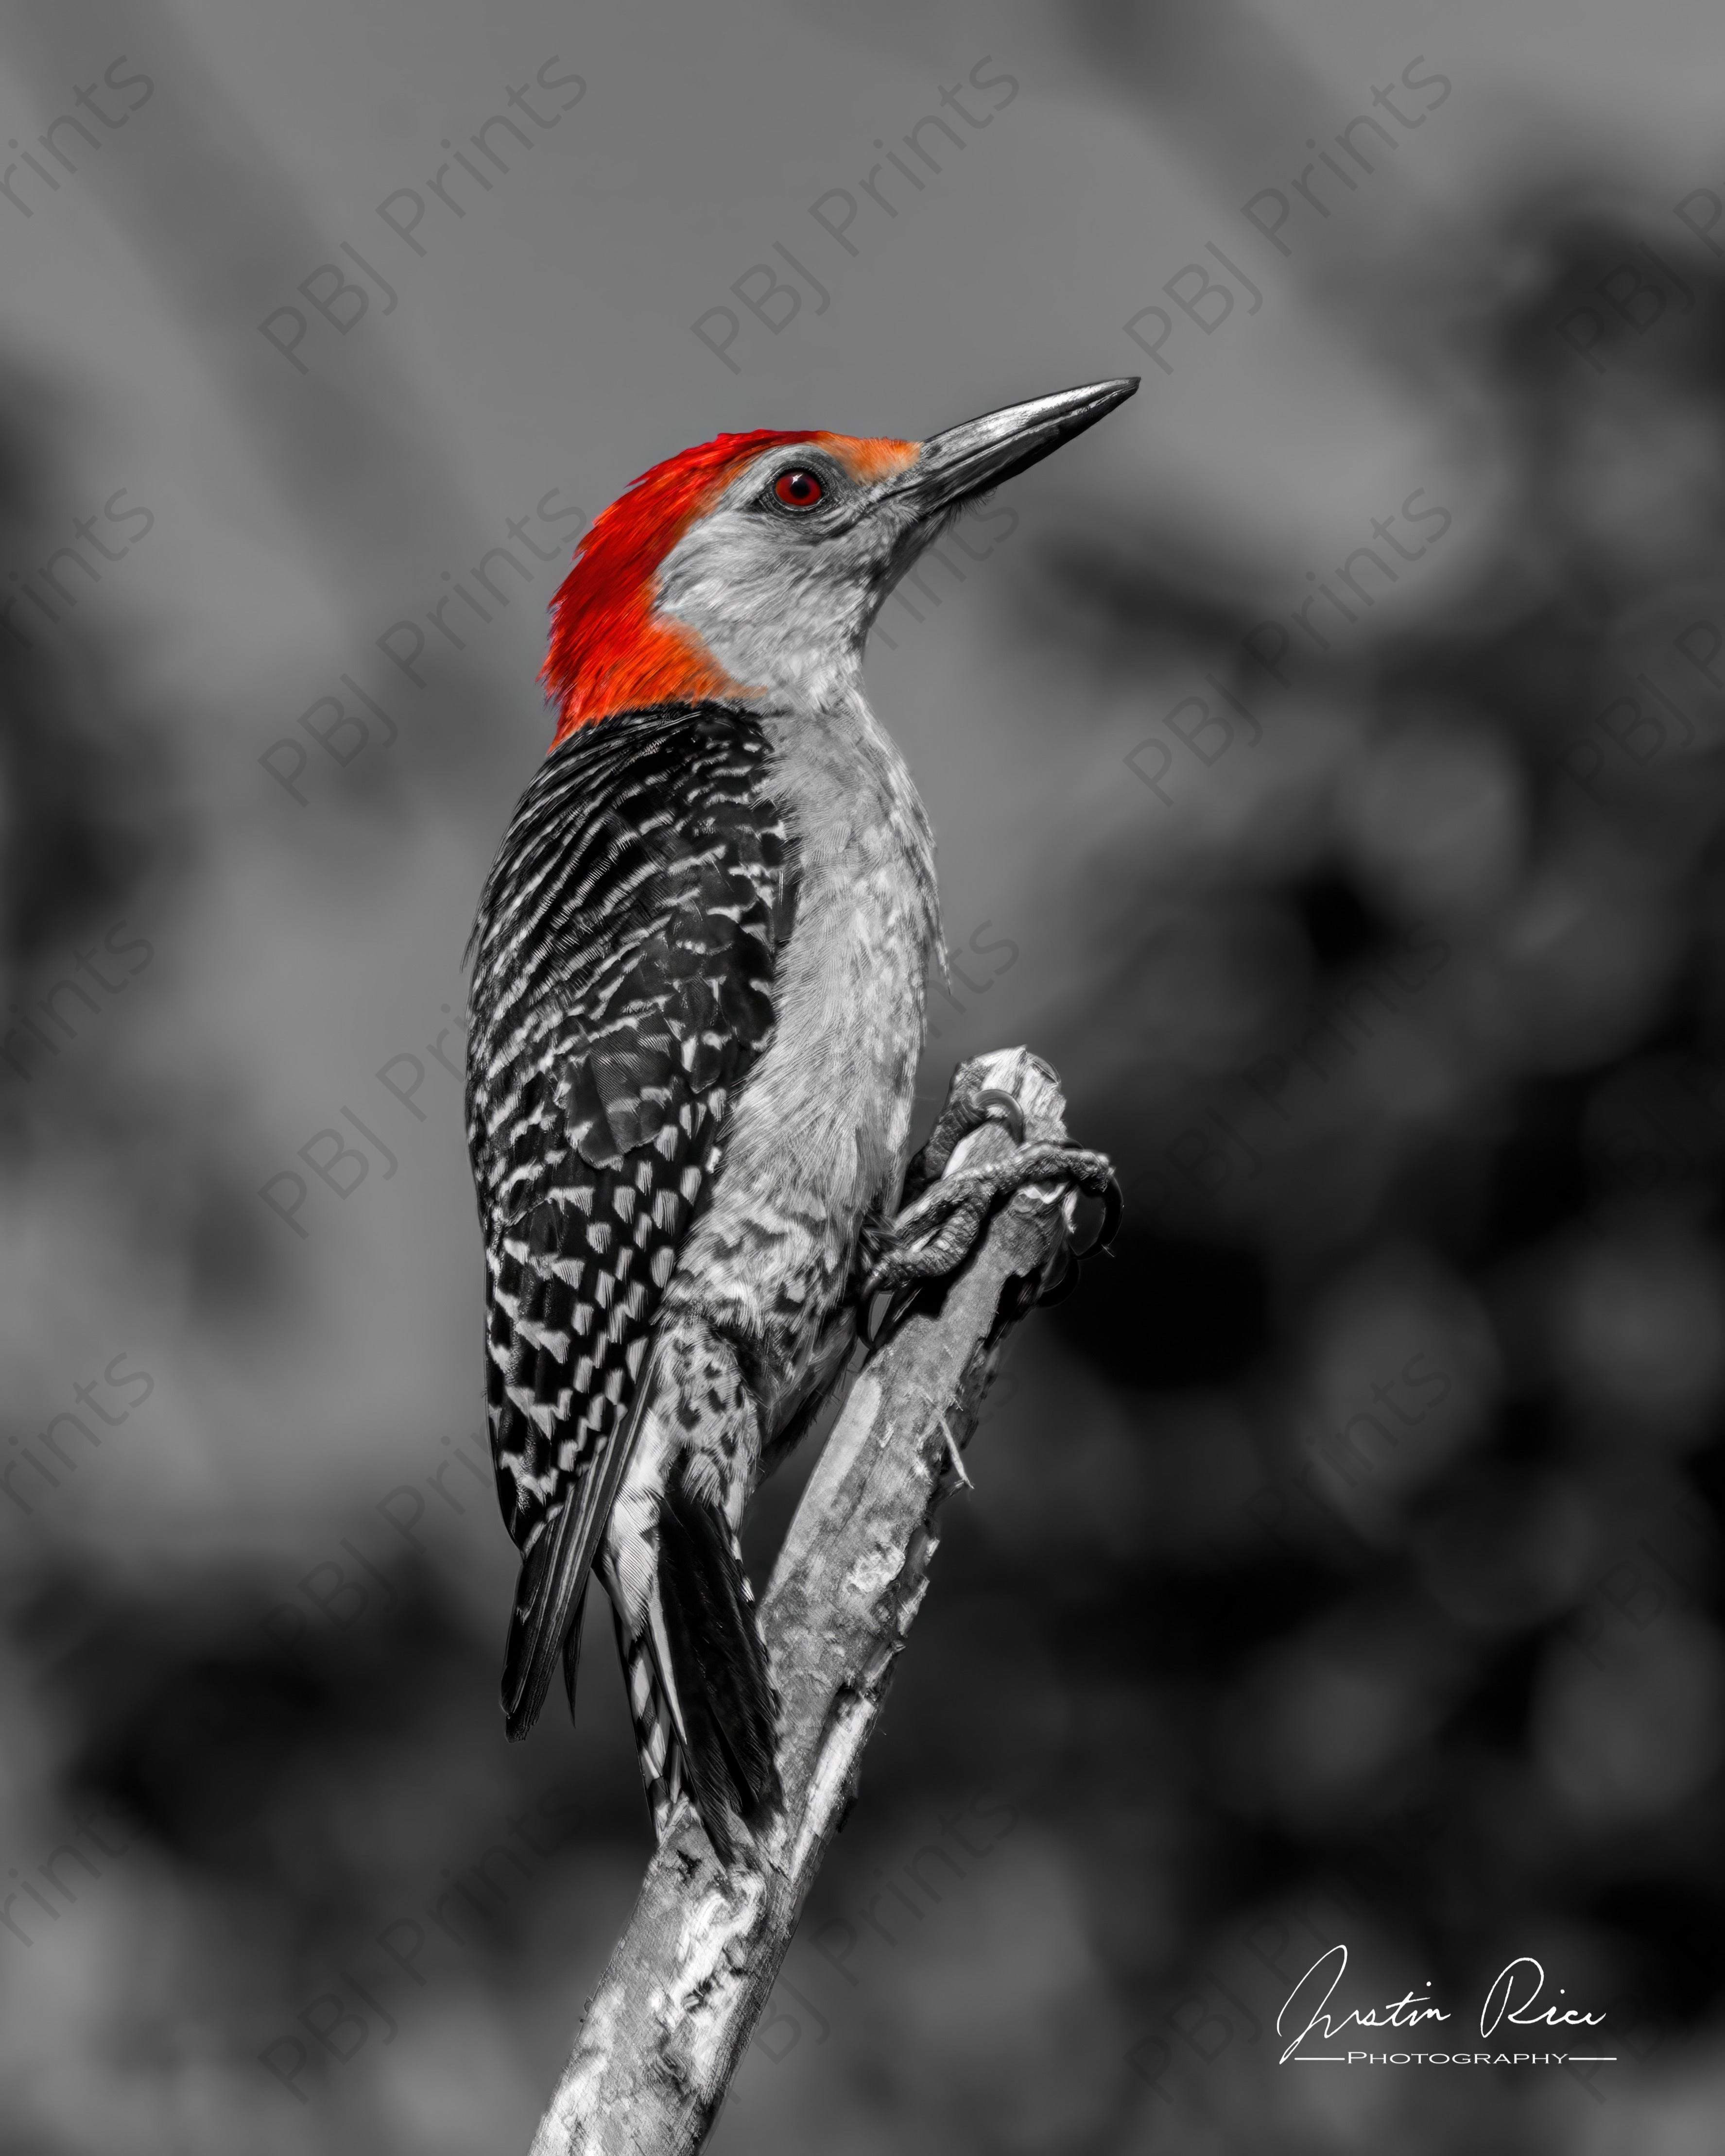 Red-bellied Woodpecker - Artist by Justin Rice - Art Prints, Decoupage Rice Paper, Flat Canvas Prints, Giclee Prints, Photo Prints, Poster Prints